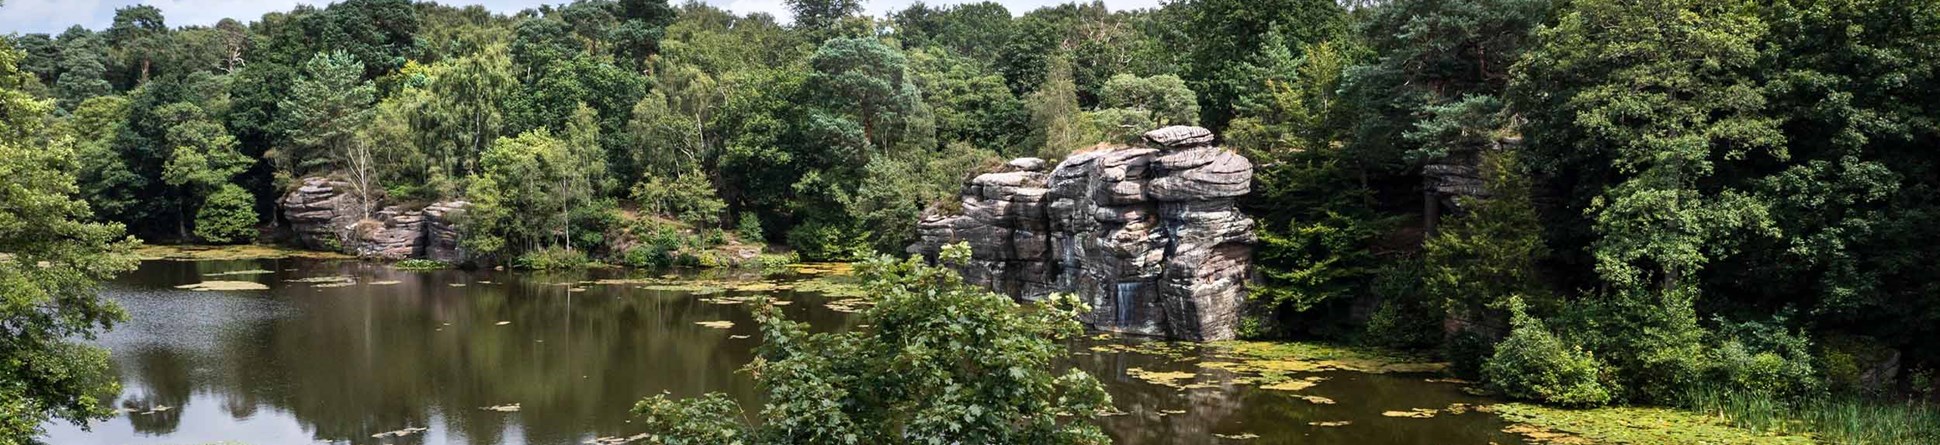 Landscape gardens, lake, rocks and dam wall at Plumpton Rocks. A man walks along the dam wall on the right of the image.